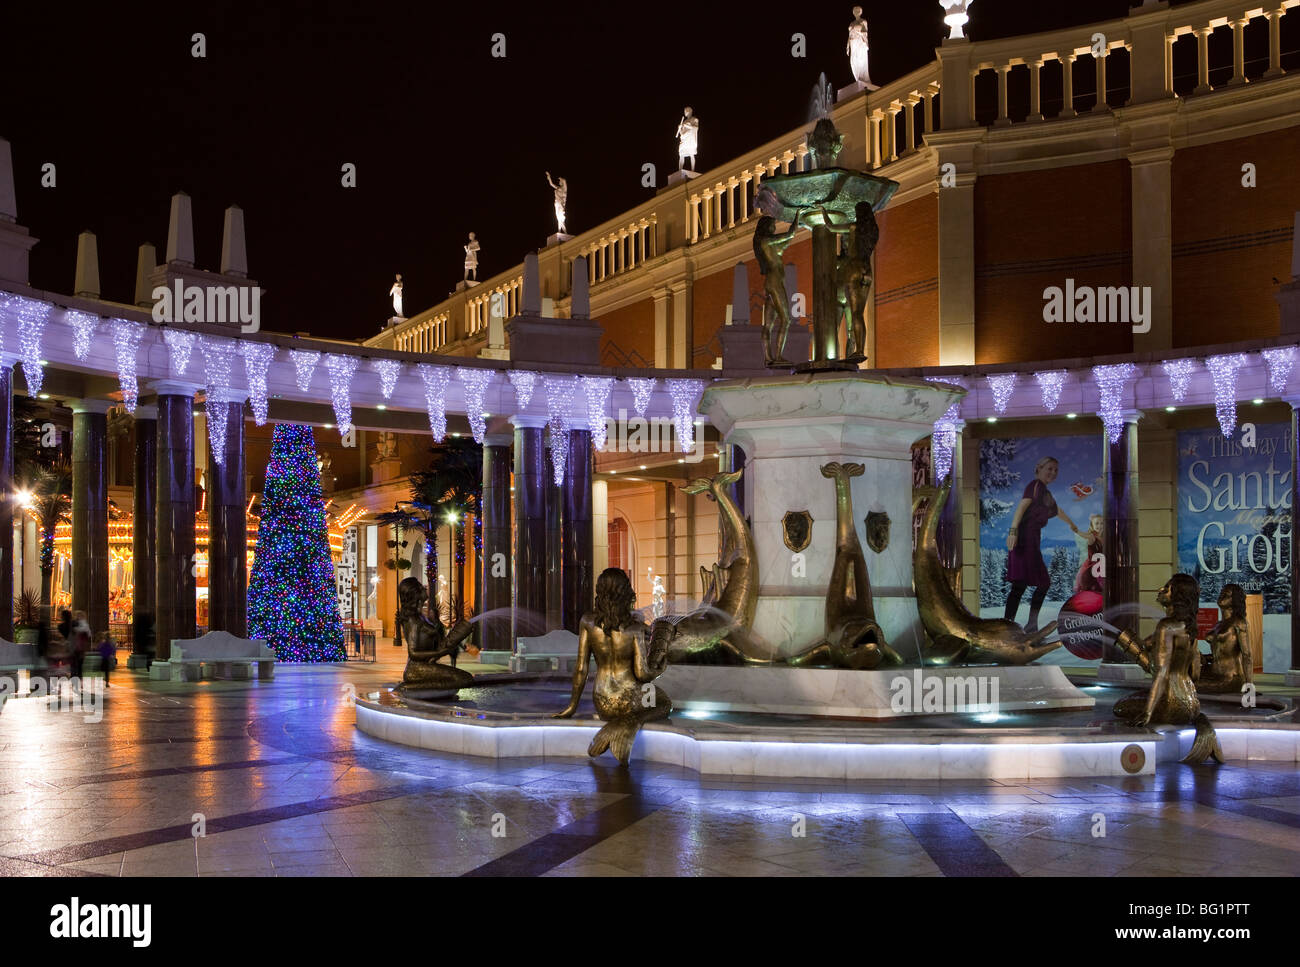 UK, England, Manchester, Trafford Centre shopping mall, Barton Square fountain decorated for Christmas Stock Photo